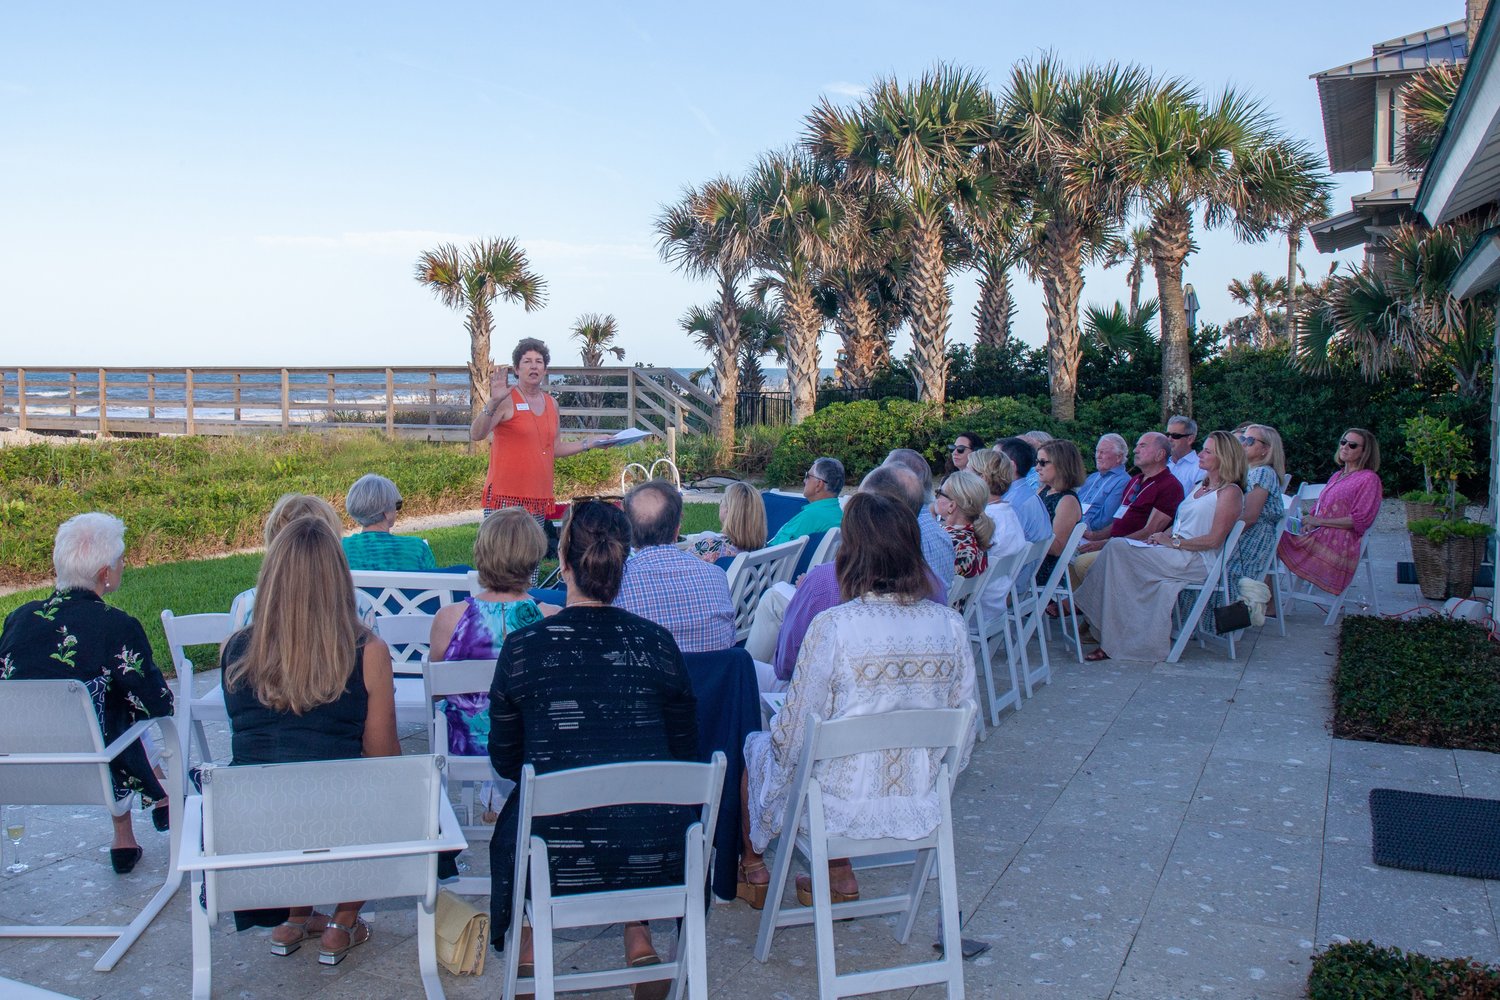 Joanne E. Cohen, VP, philanthropic services at The Community Foundation, addresses members of the Beaches Community Fund during their recent ratification of the 2022 grants to Beaches-area nonprofit organizations.